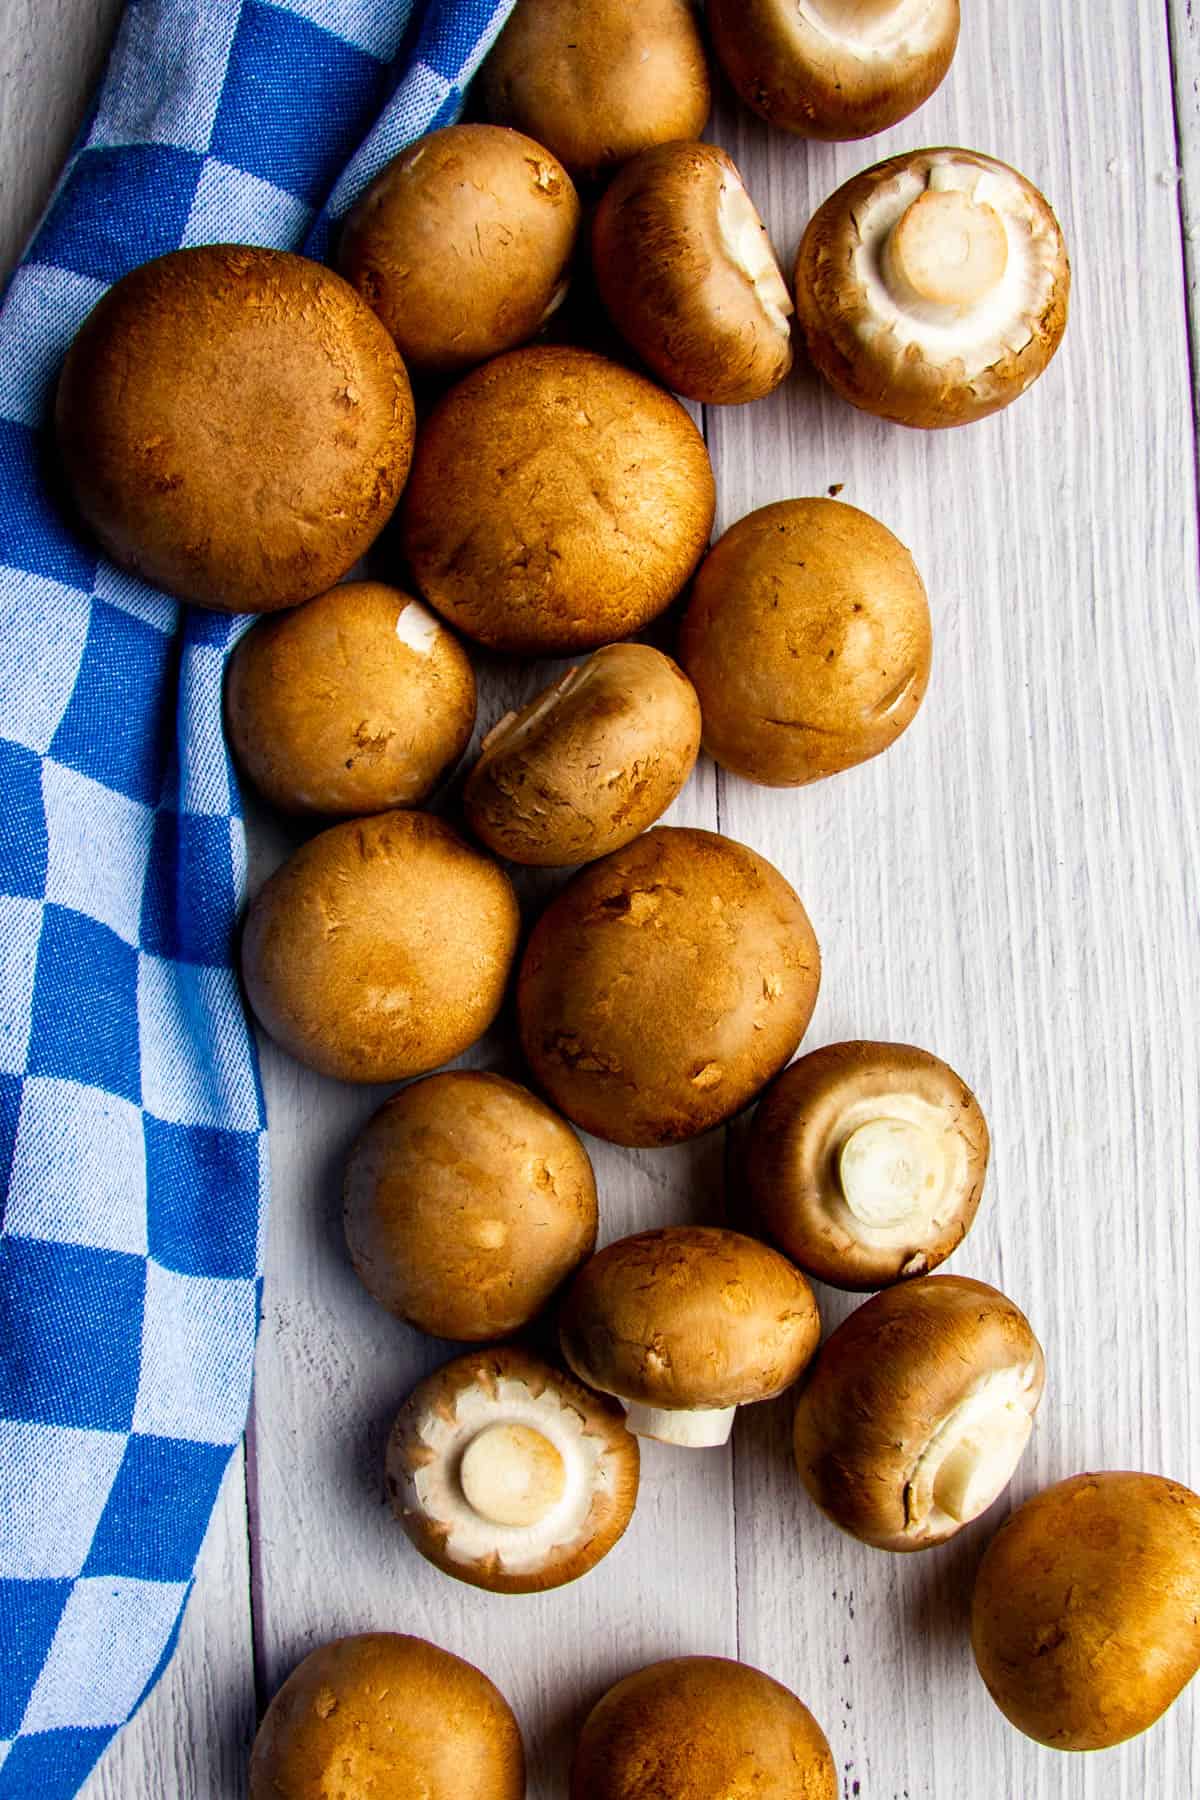 Raw mushrooms on a white wooden board with a blue towel beside.